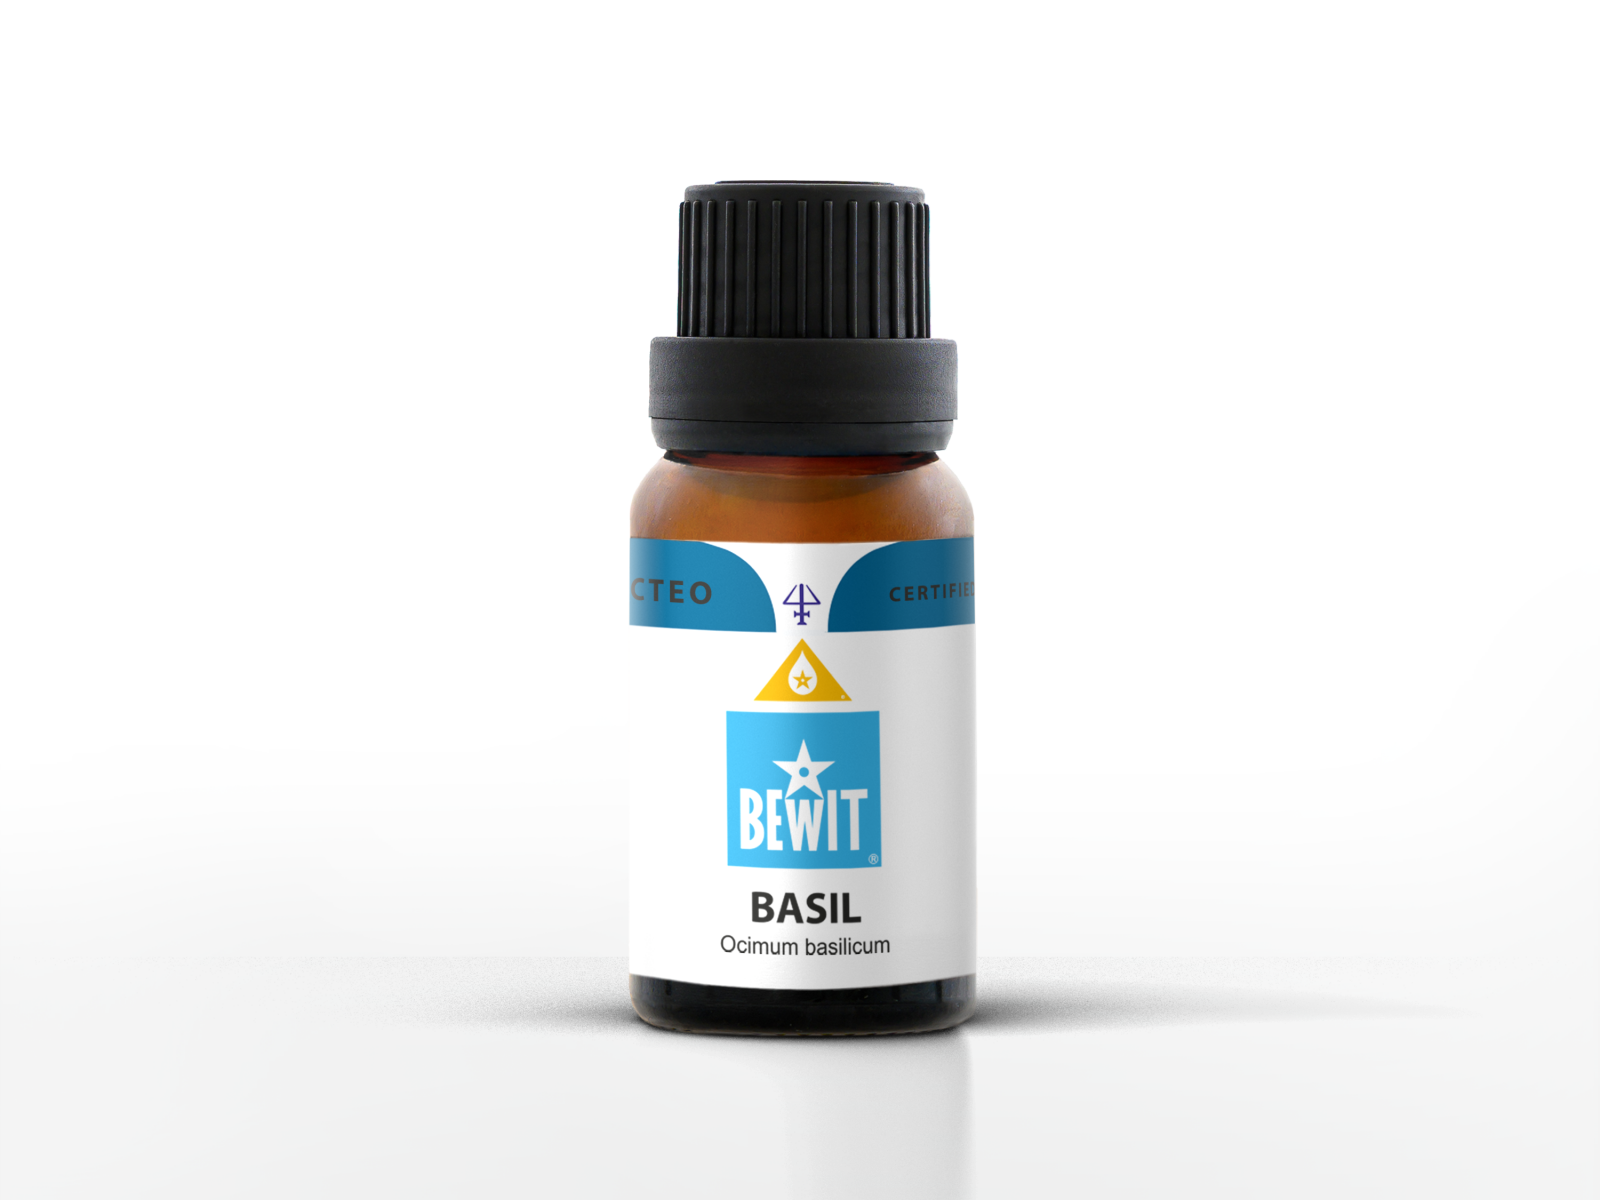 BEWIT Basil. - This is a 100% pure essential oil - 3